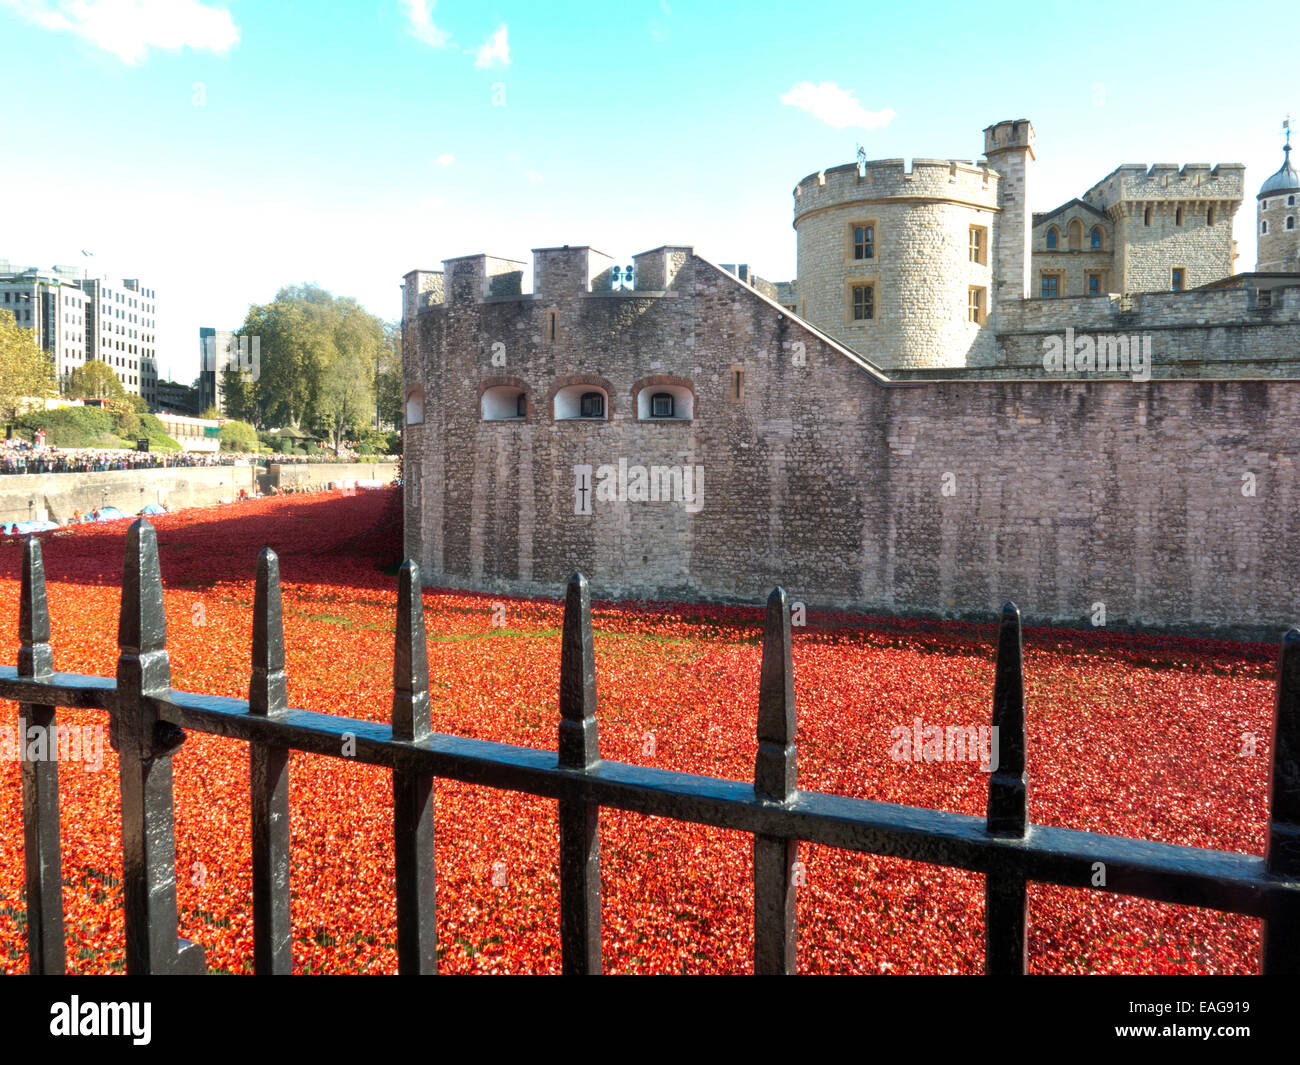 2014 Ceramic poppy display Tower of London symbolising the World War 1 Centenary 'Blood Swept Lands and Seas of Red’ Stock Photo